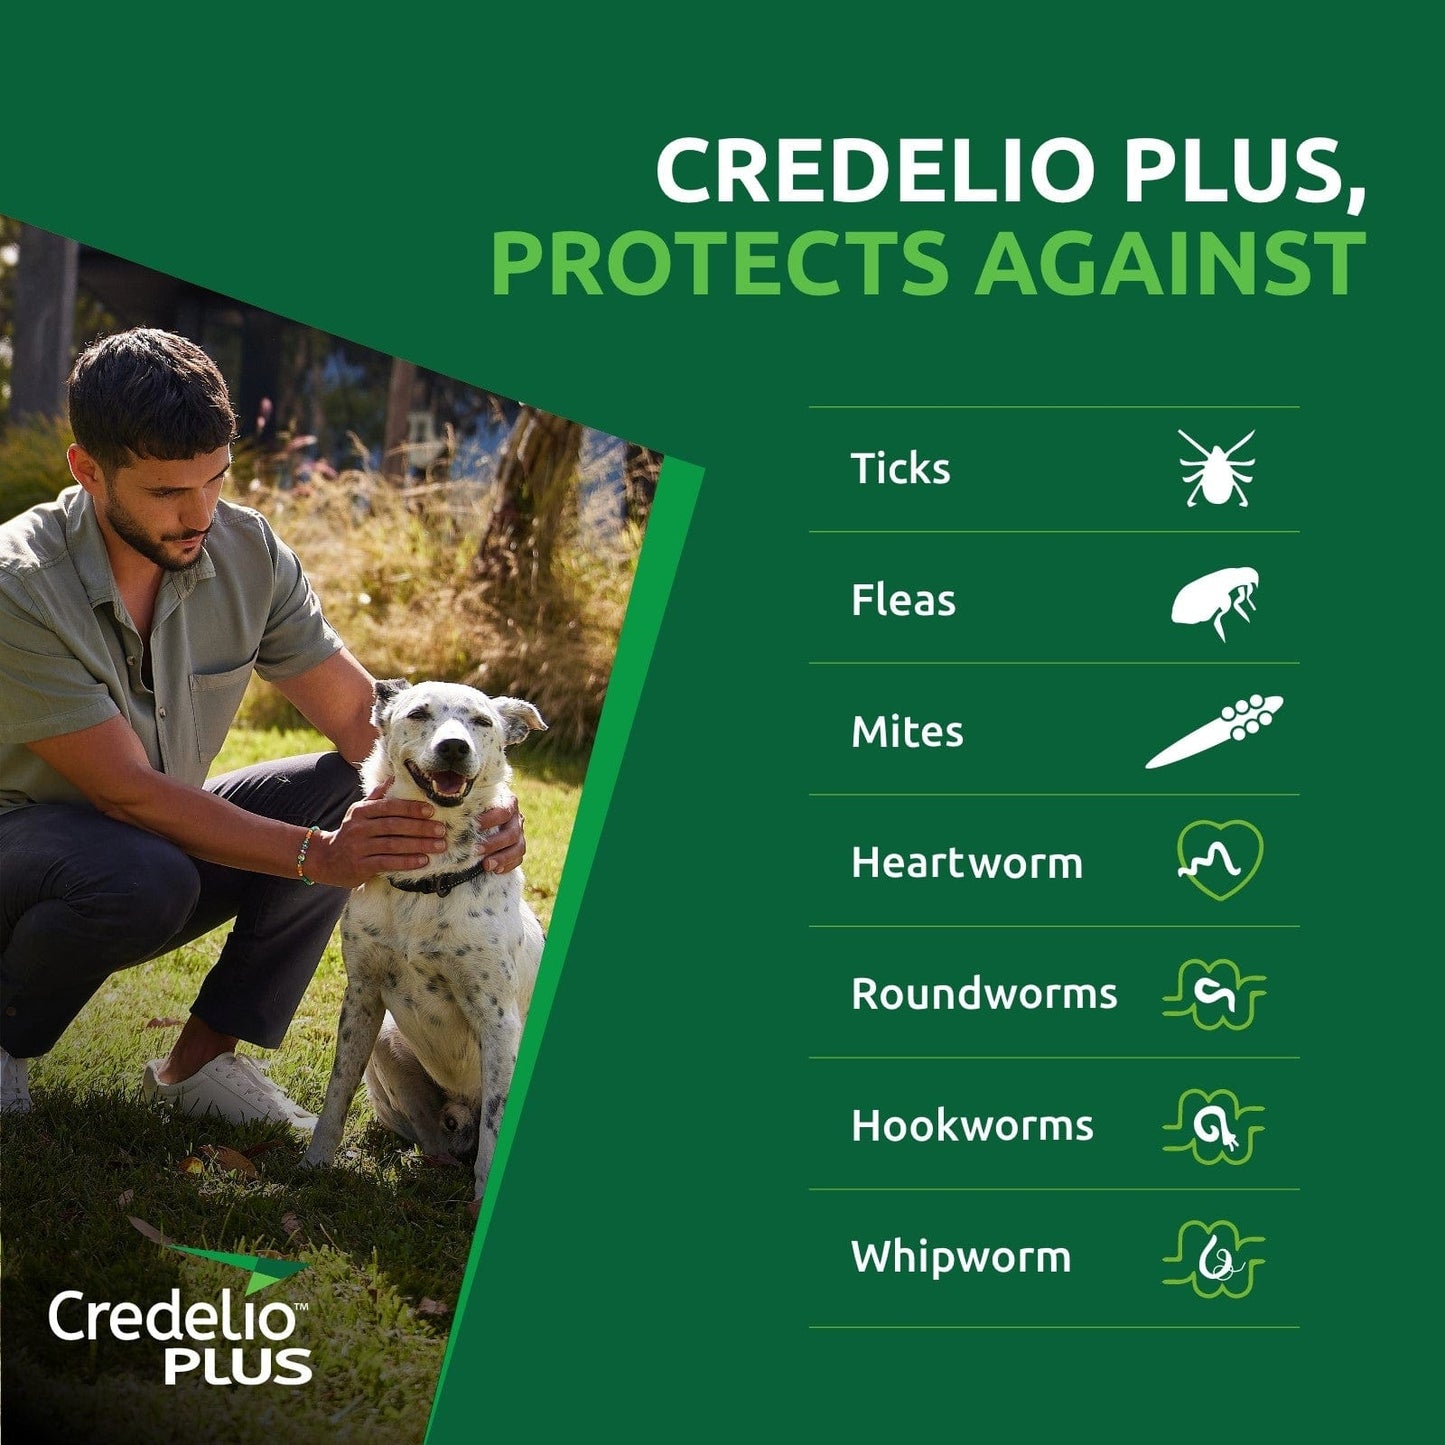 Credelio Dog Health Credelio™ PLUS Blue For Extra Large Dogs 22-45 kg